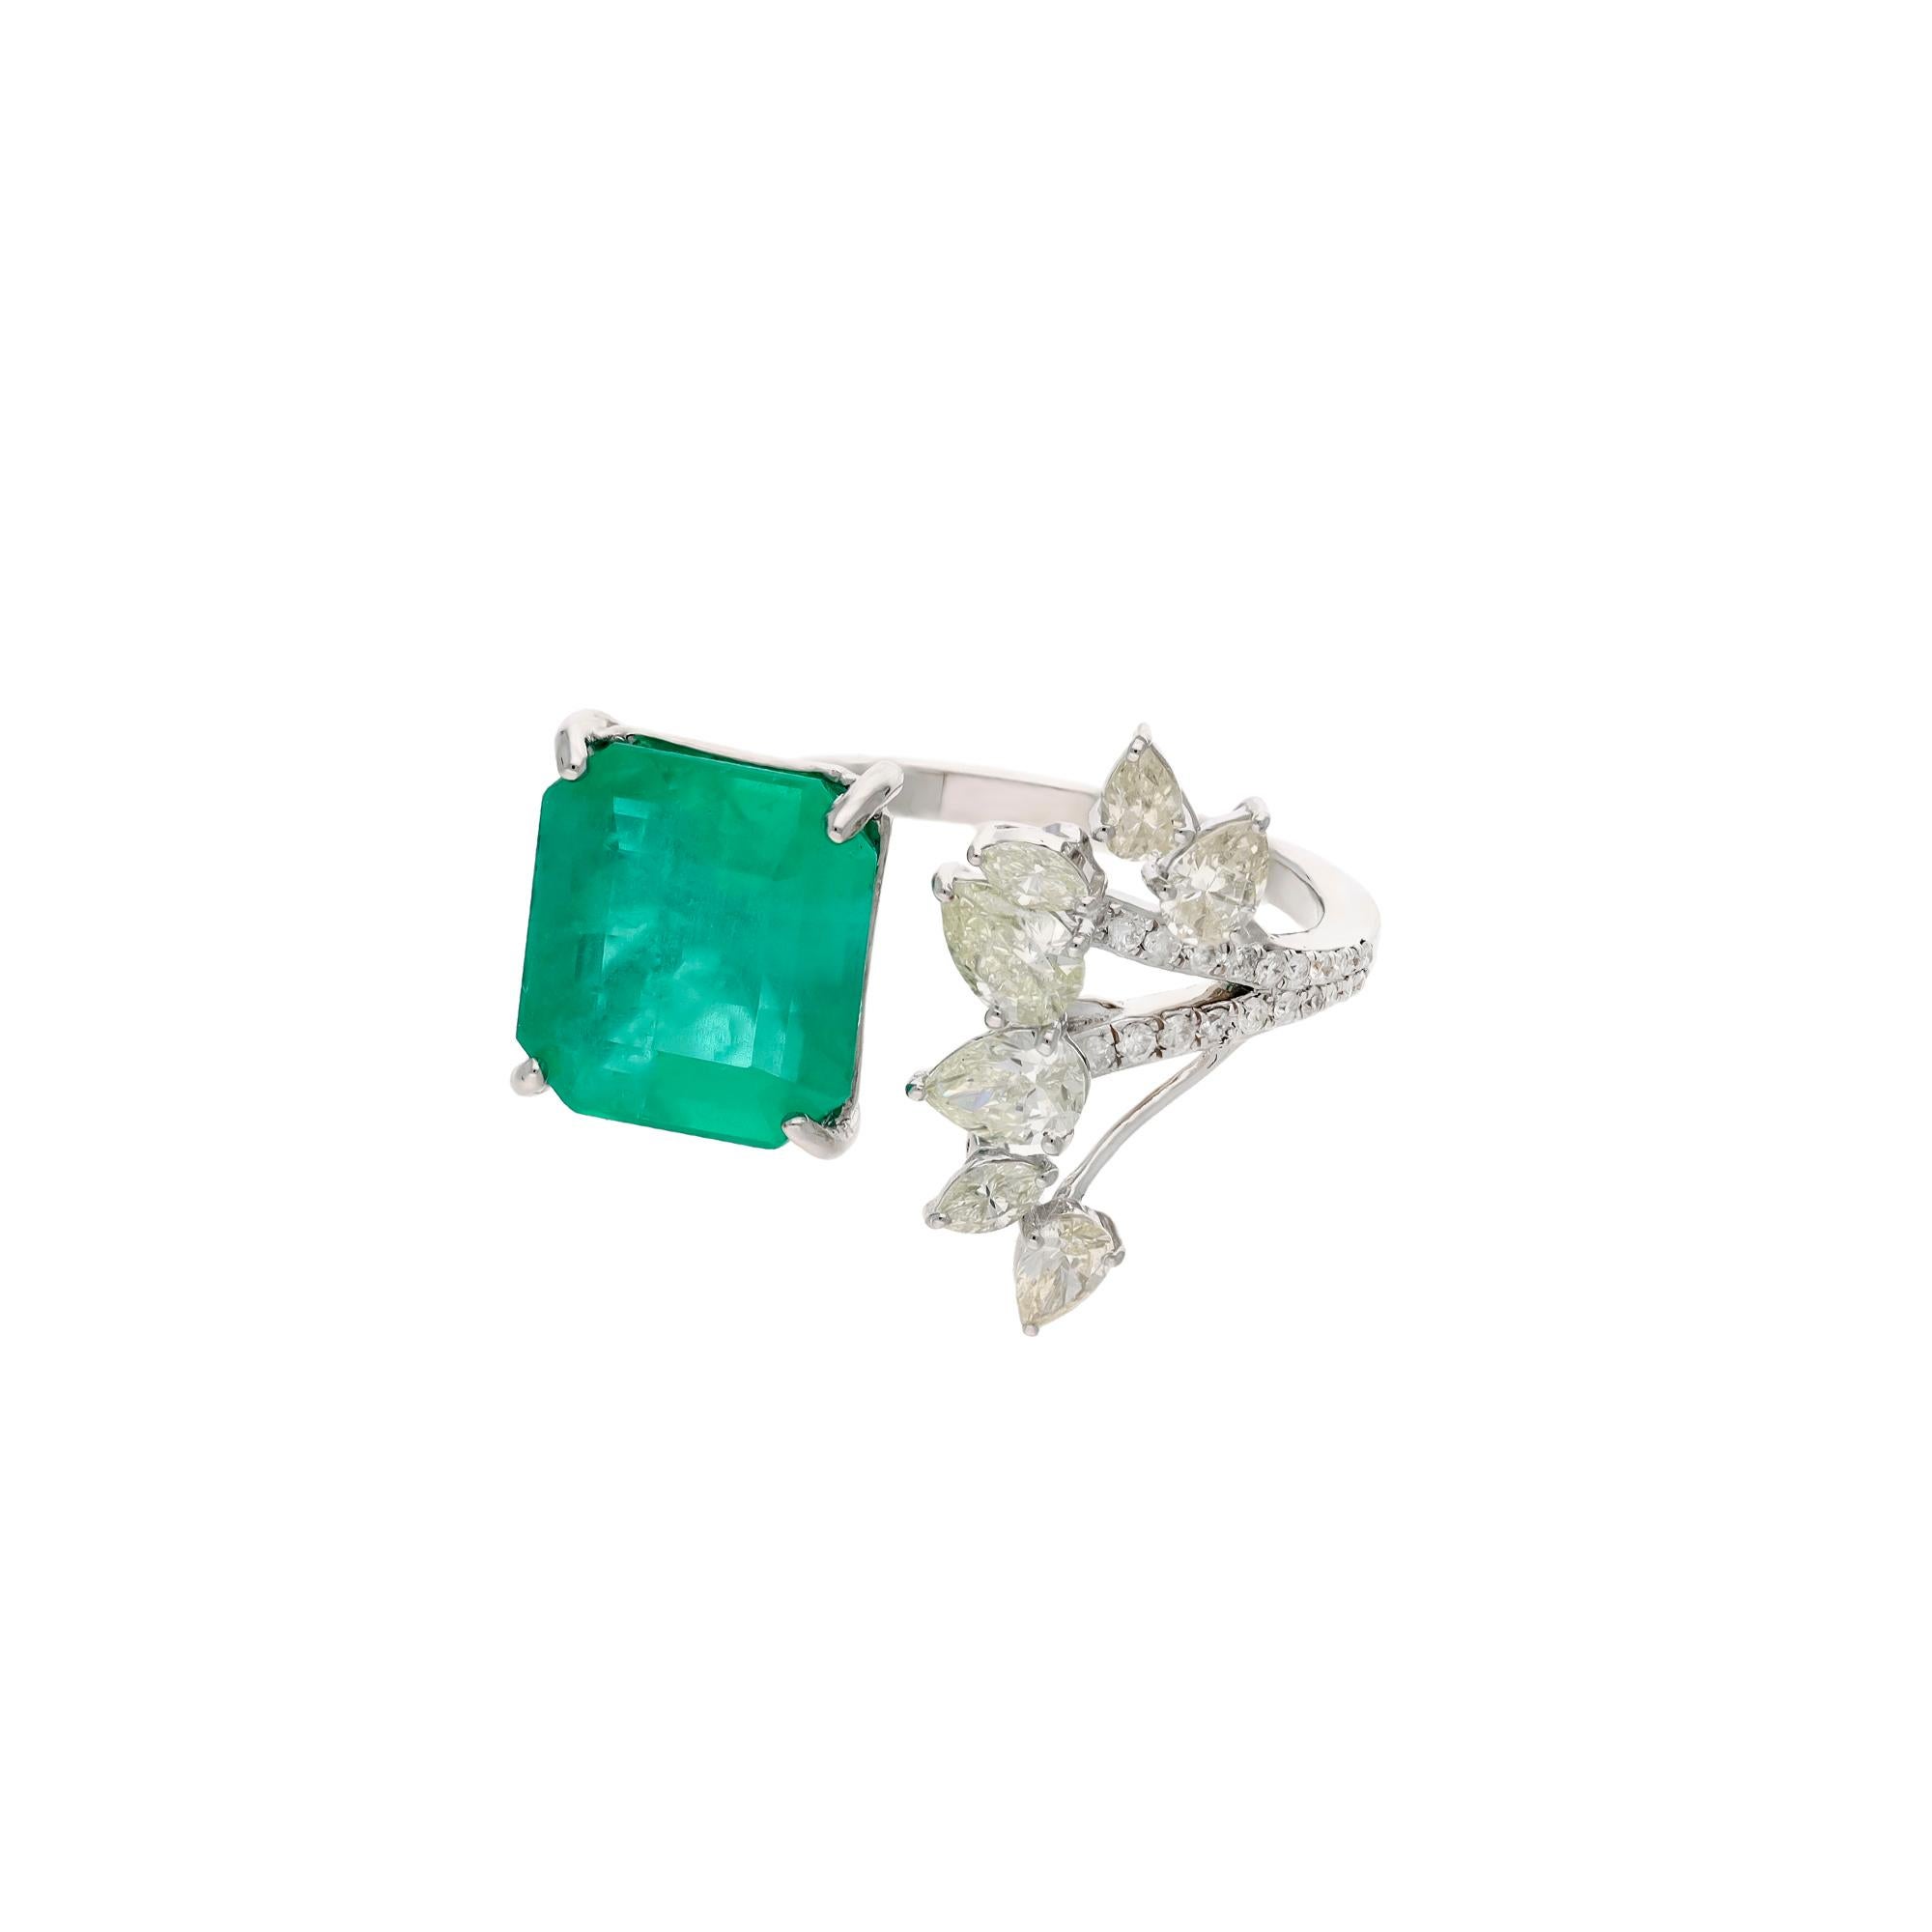 This is a natural Zambian Emerald ring with diamonds and 18k gold. The emeralds are very high quality and very good quality diamonds the clarity is vsi and G colour


Emeralds : 4.85 carats
diamonds : 0.92 carats
gold : 3.687 gm

This is a brand new